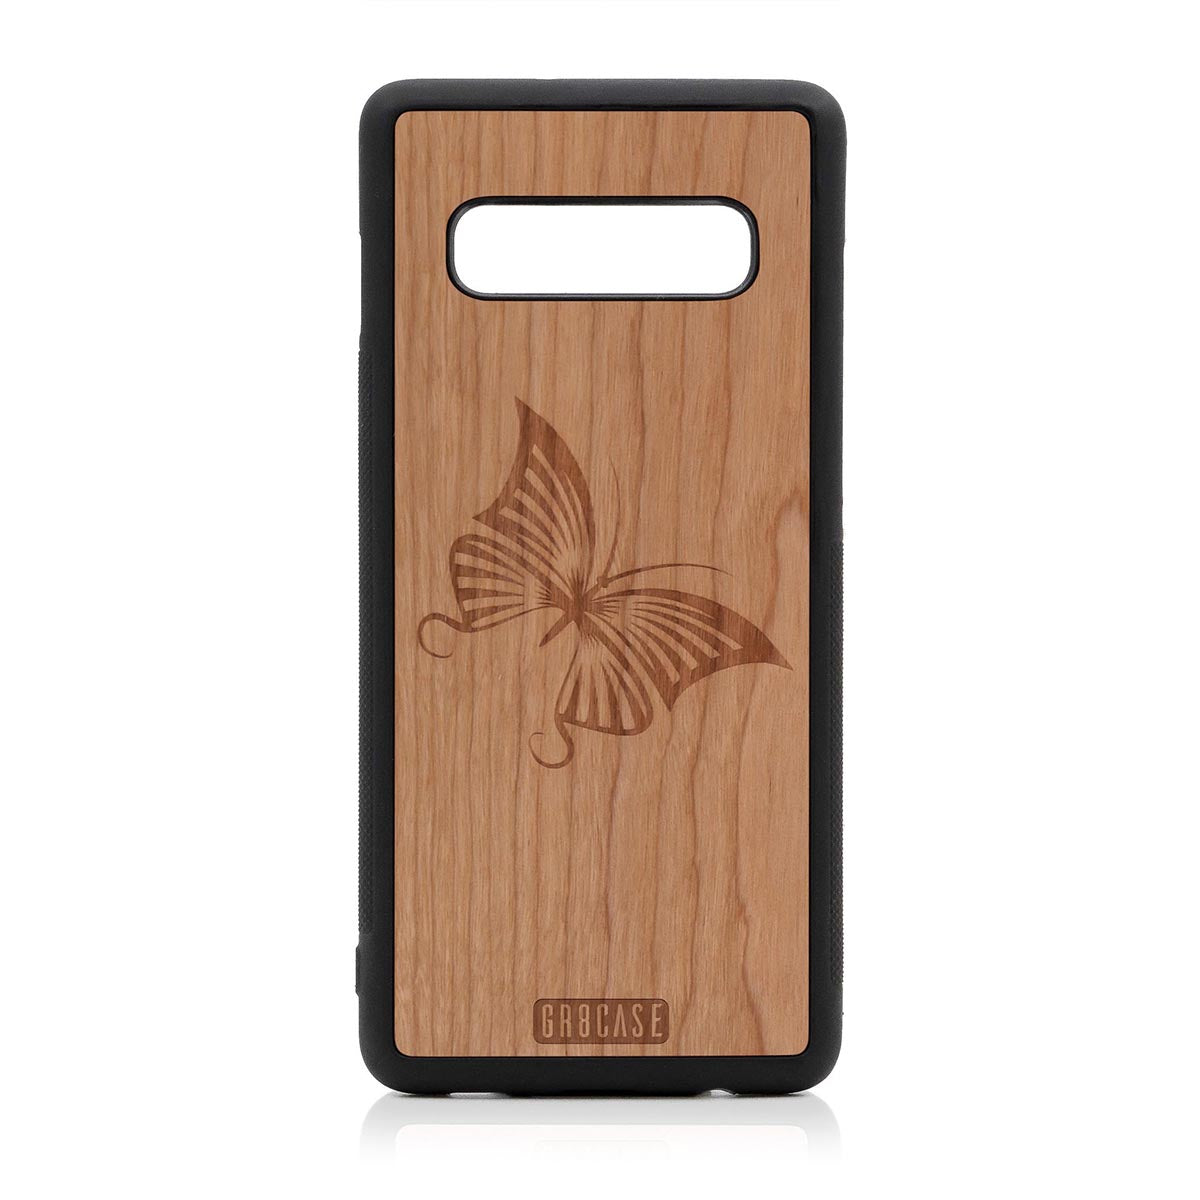 Butterfly Design Wood Case Samsung Galaxy S10 Plus by GR8CASE